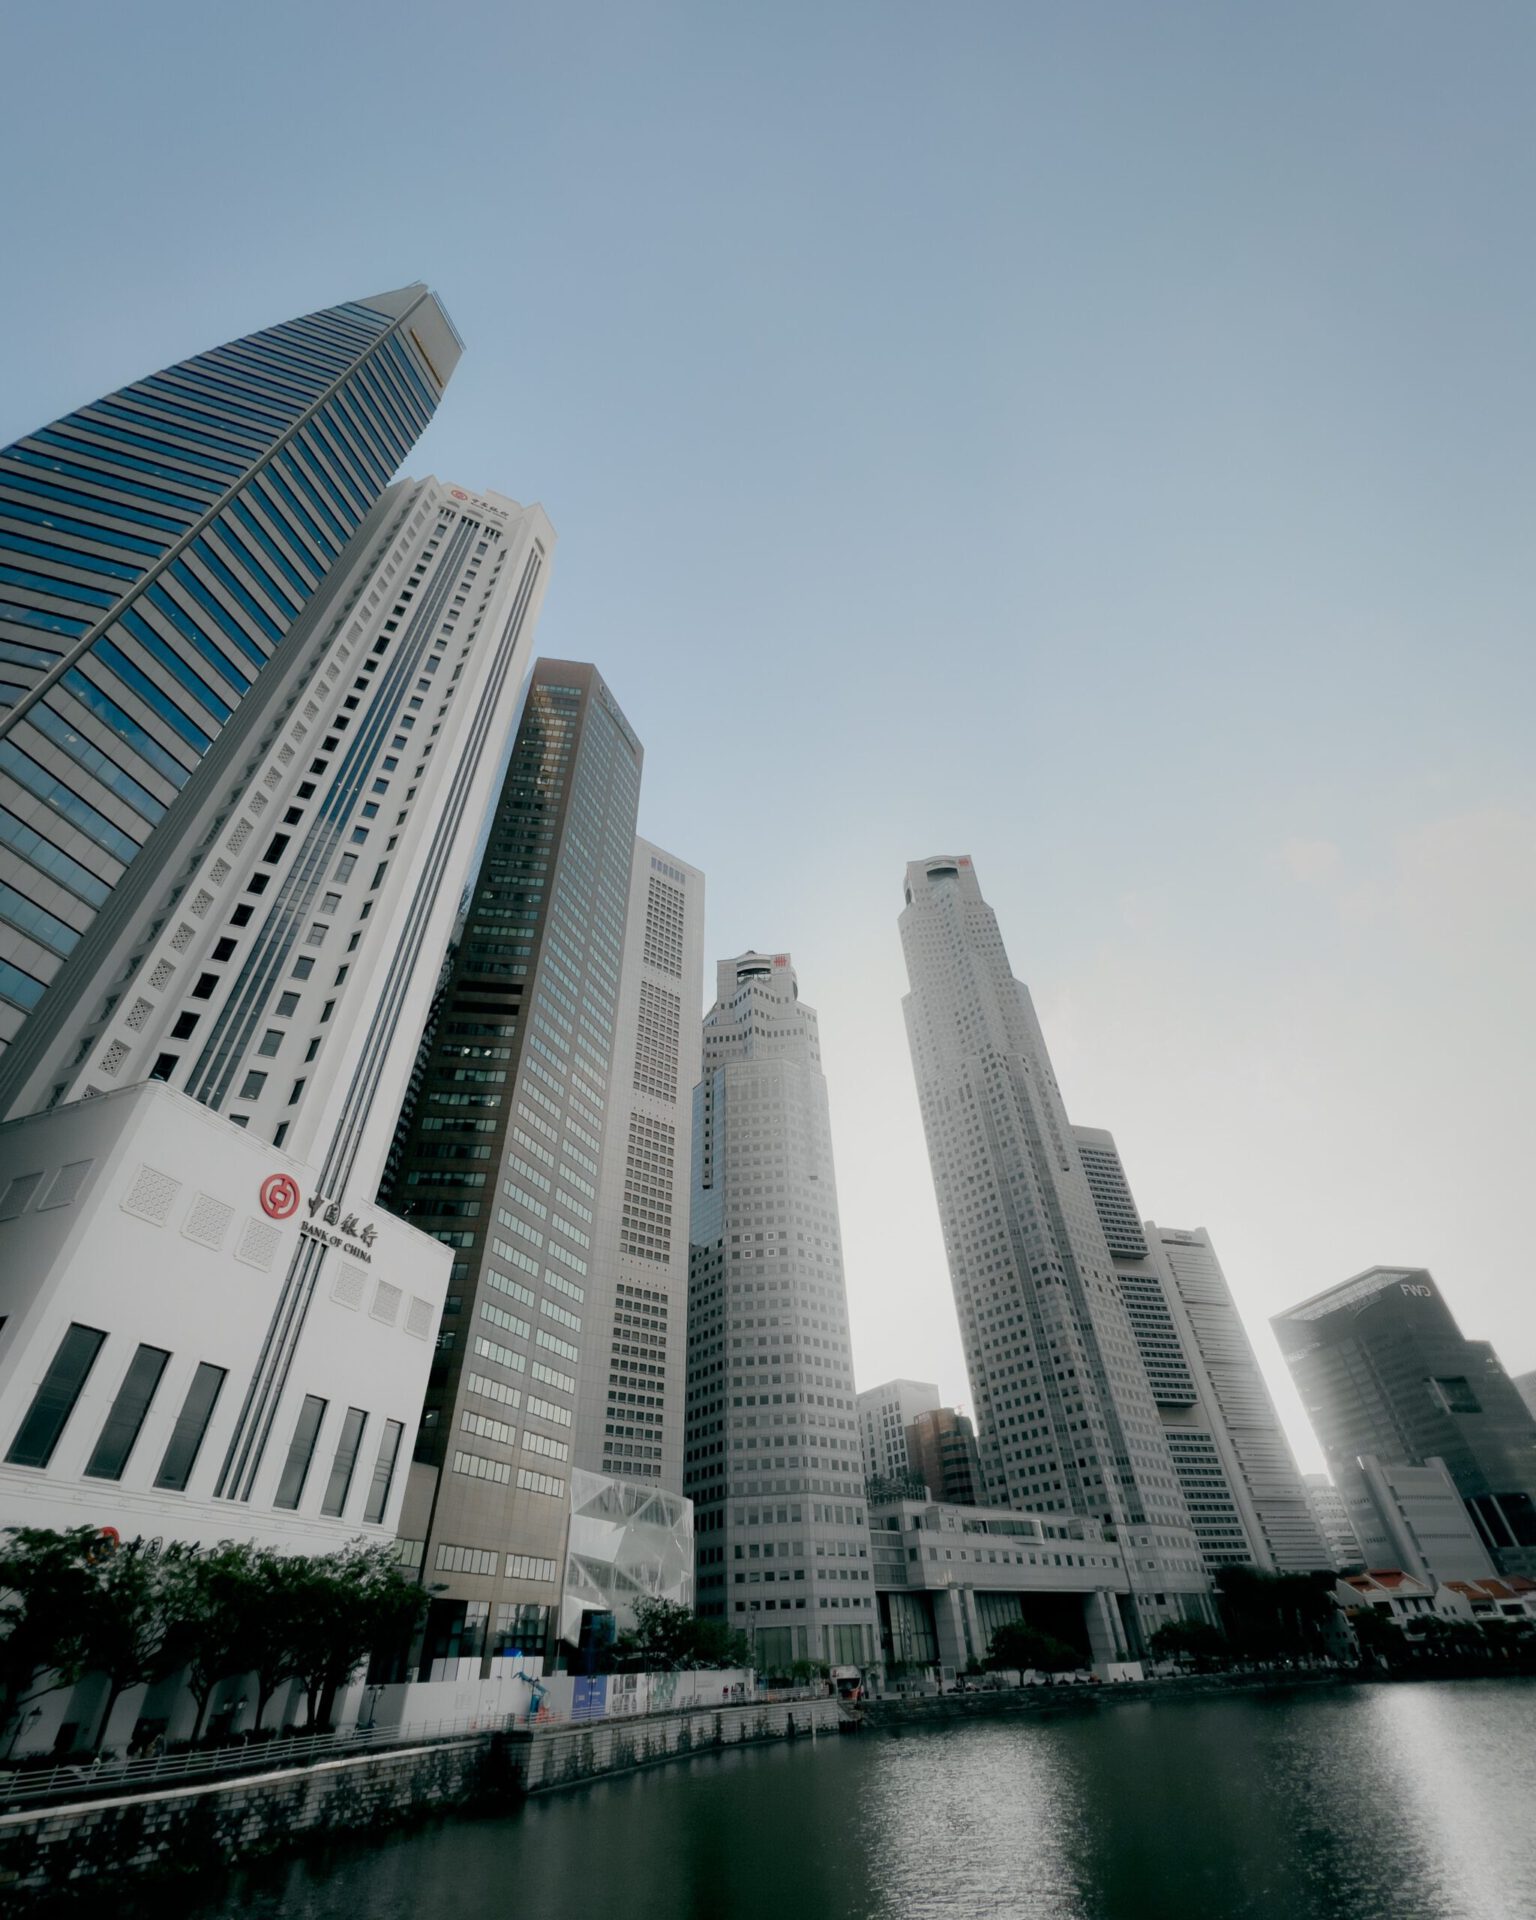 Illustrative image for financial services, showing skyscrapers of banks